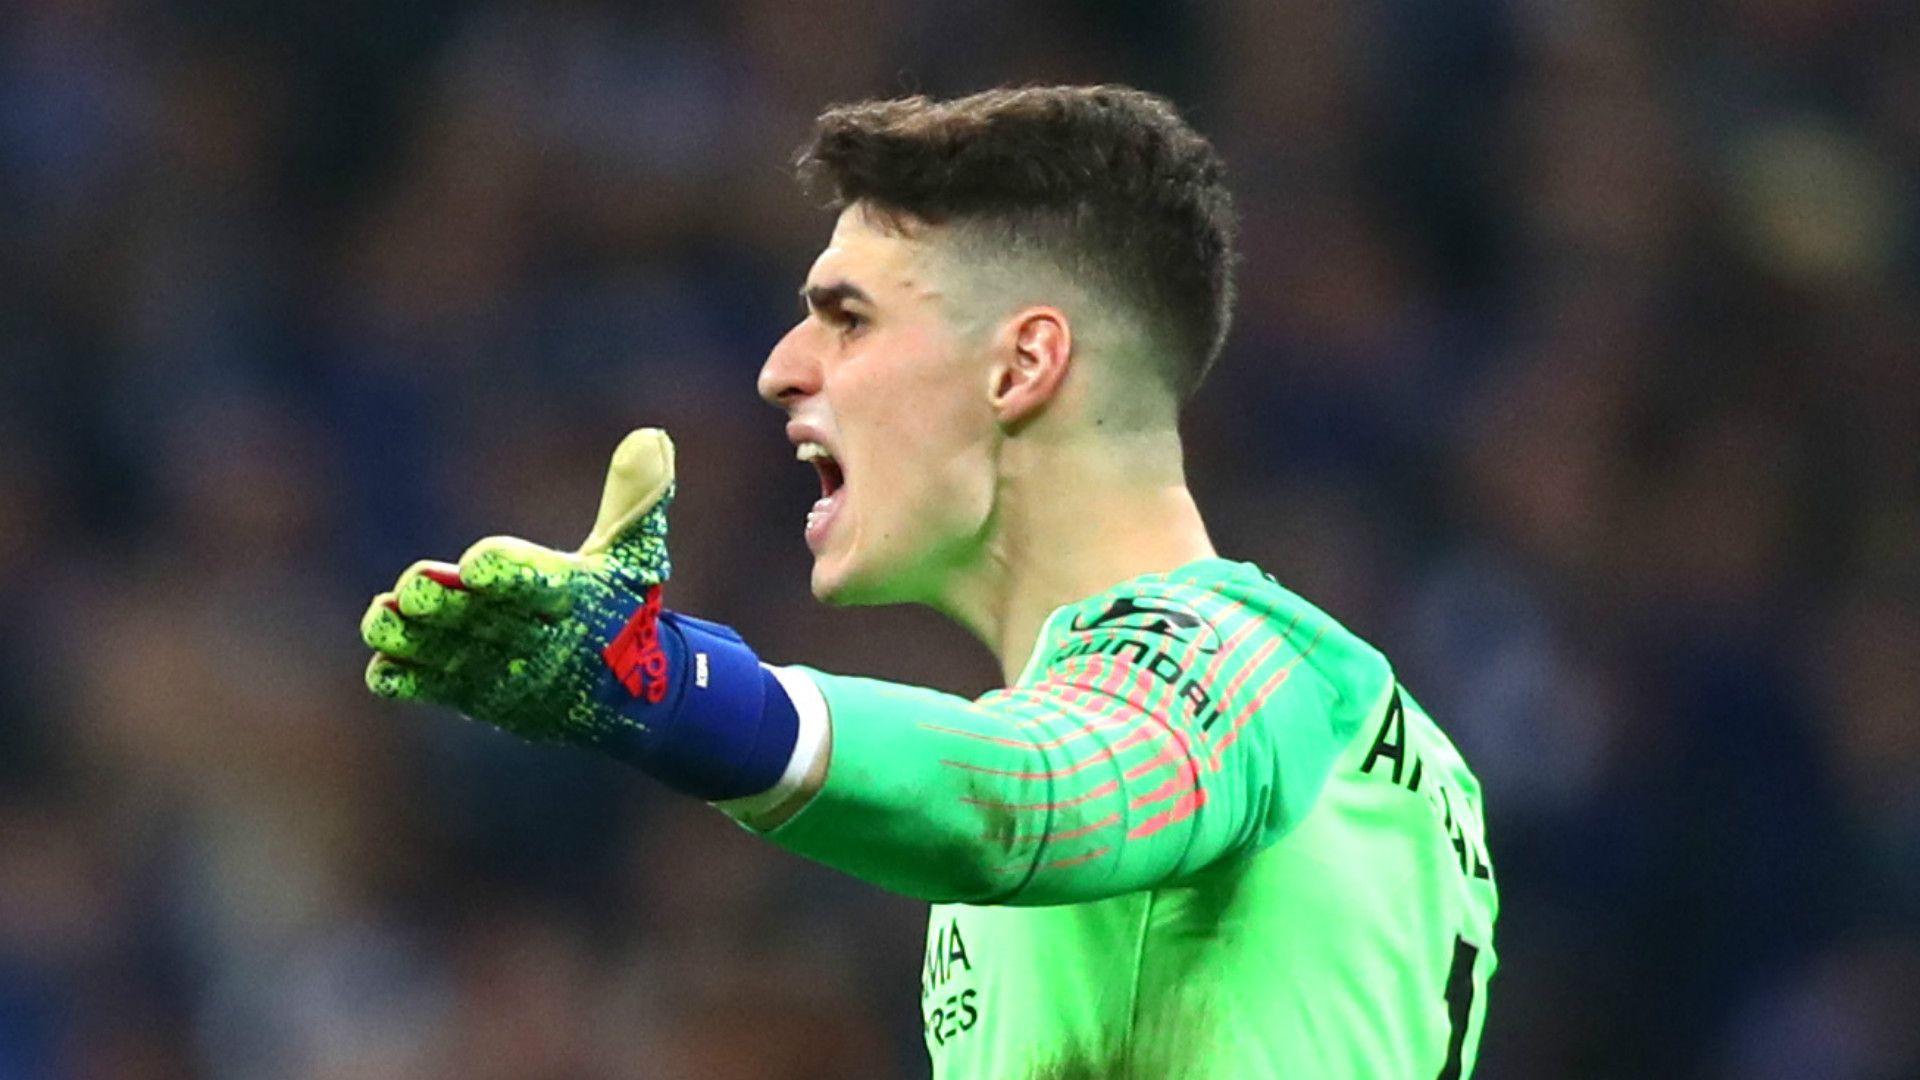 Kepa is a 'disgrace' and should never play for Chelsea again